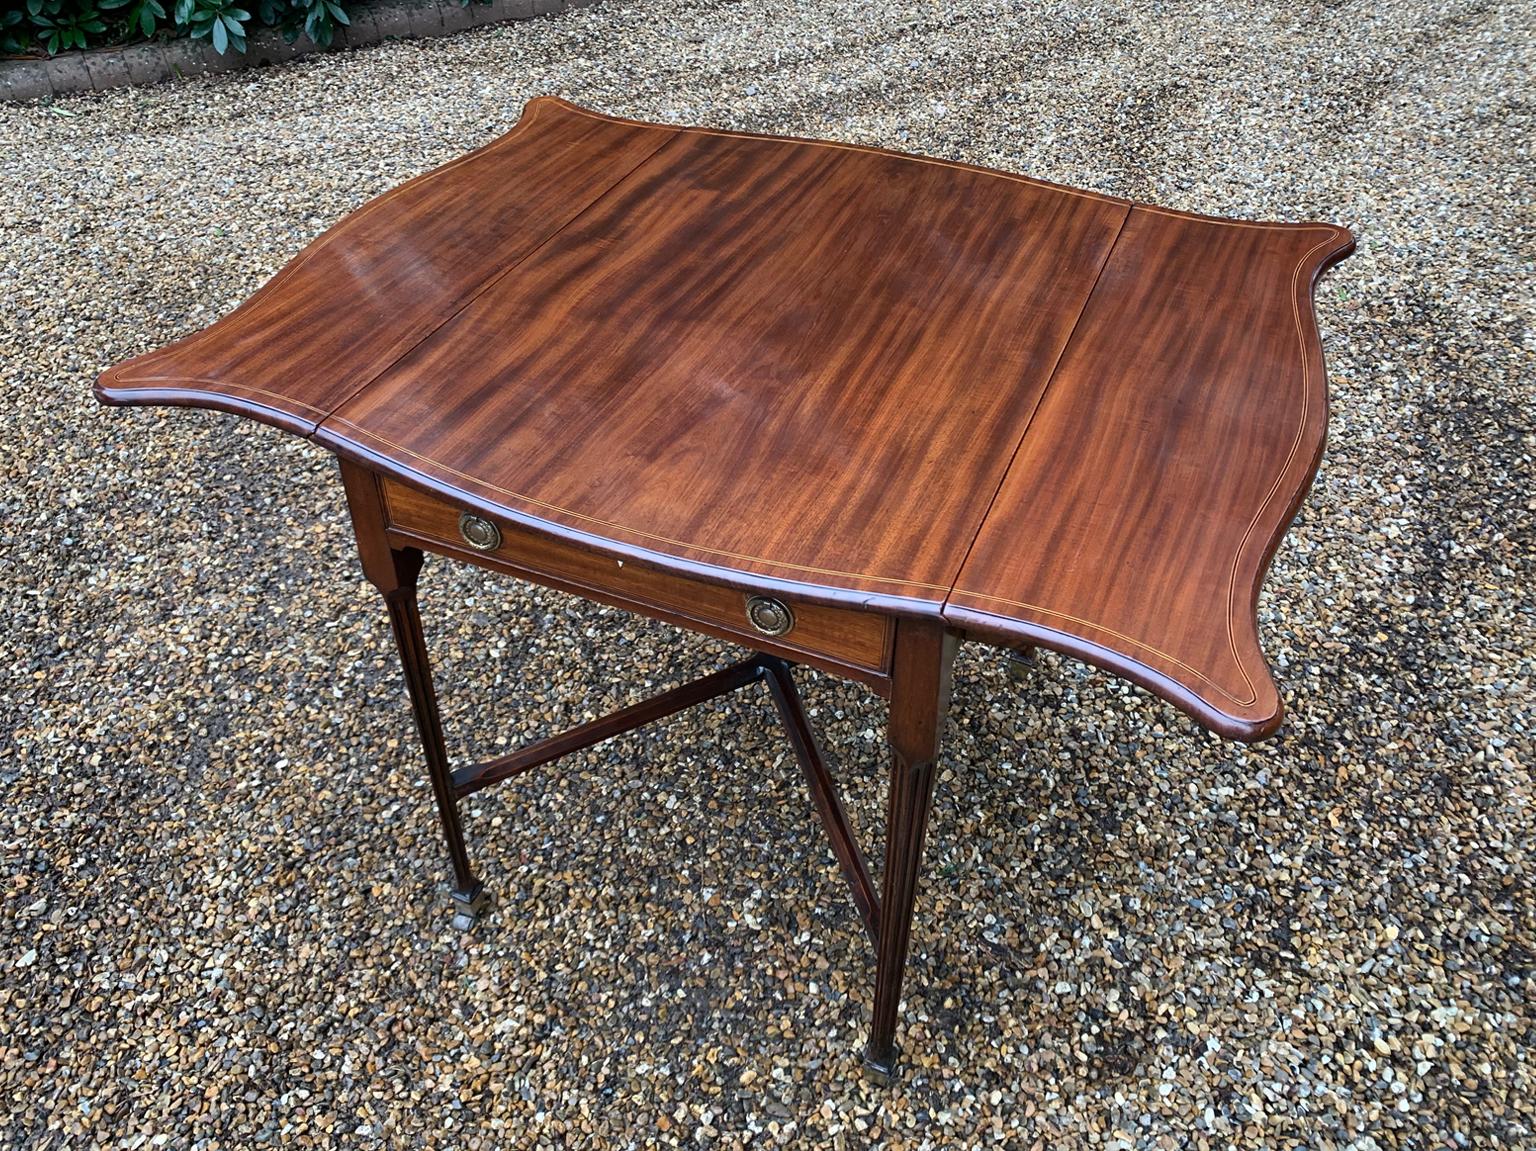 Hand-Crafted 18th Century Mahogany Pembroke Butterfly / Serpentine Table